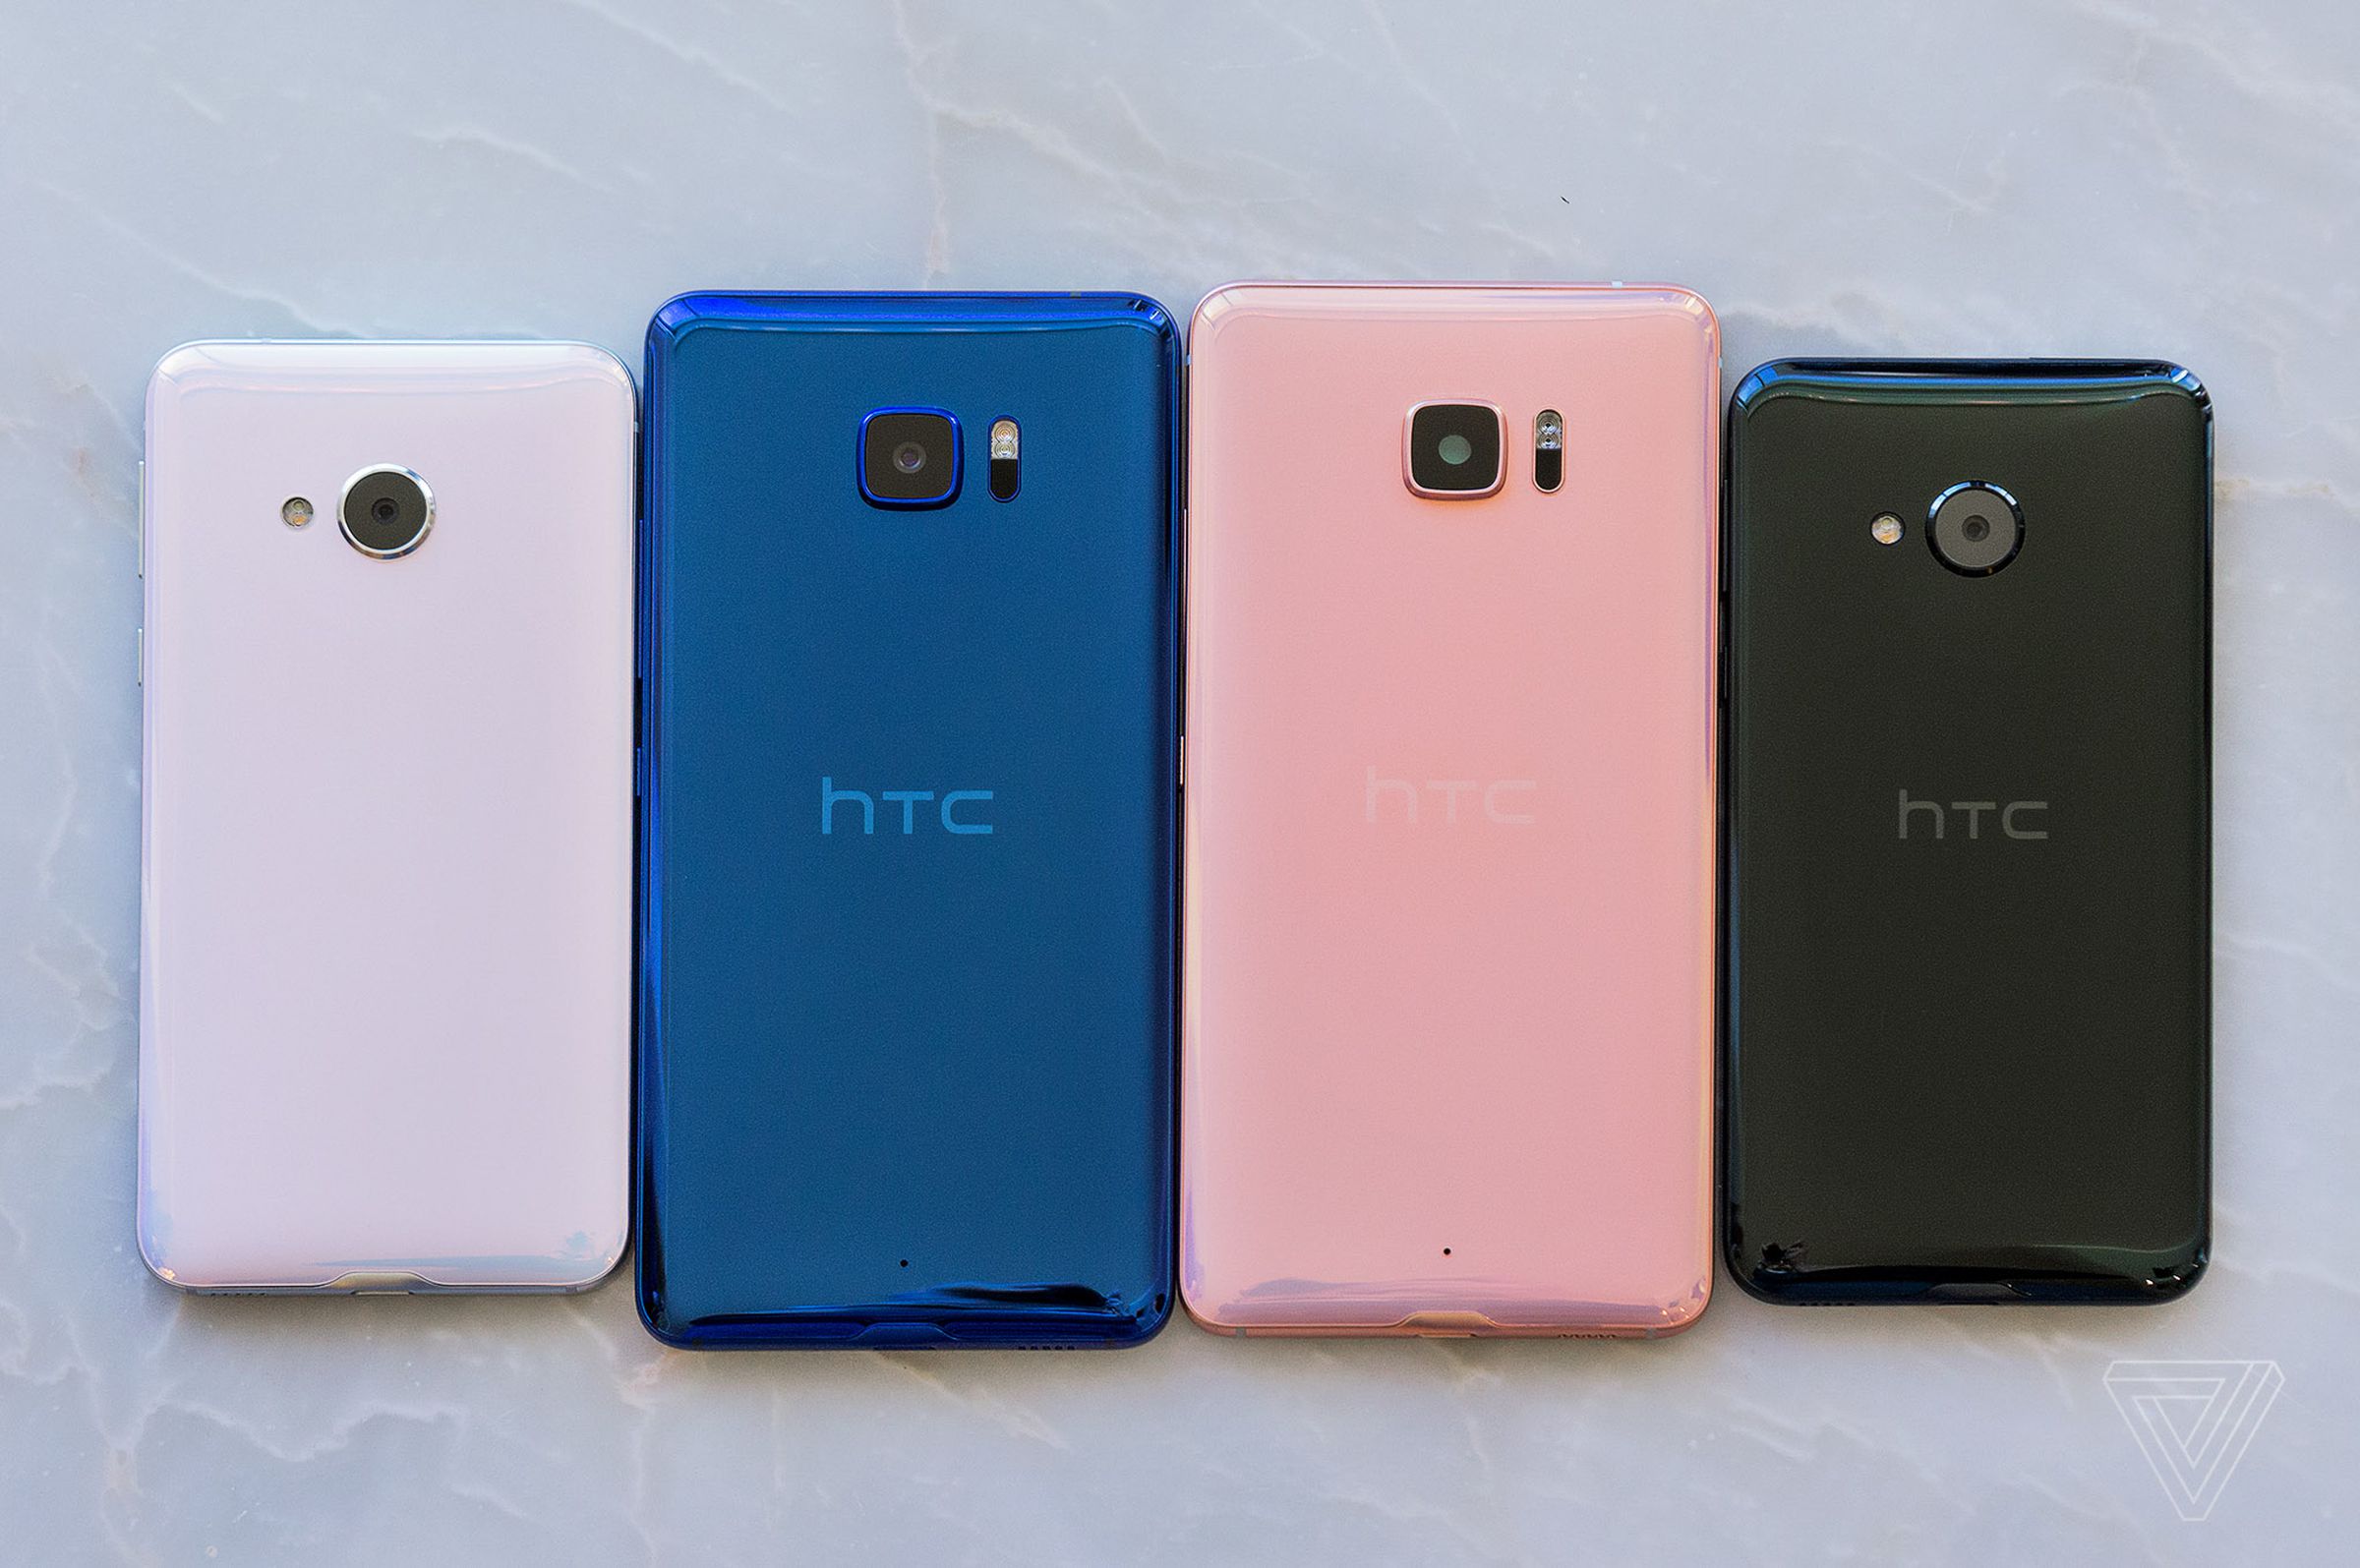 HTC’s U Ultra in blue and pink, bracketed by the smaller U Play in white and black